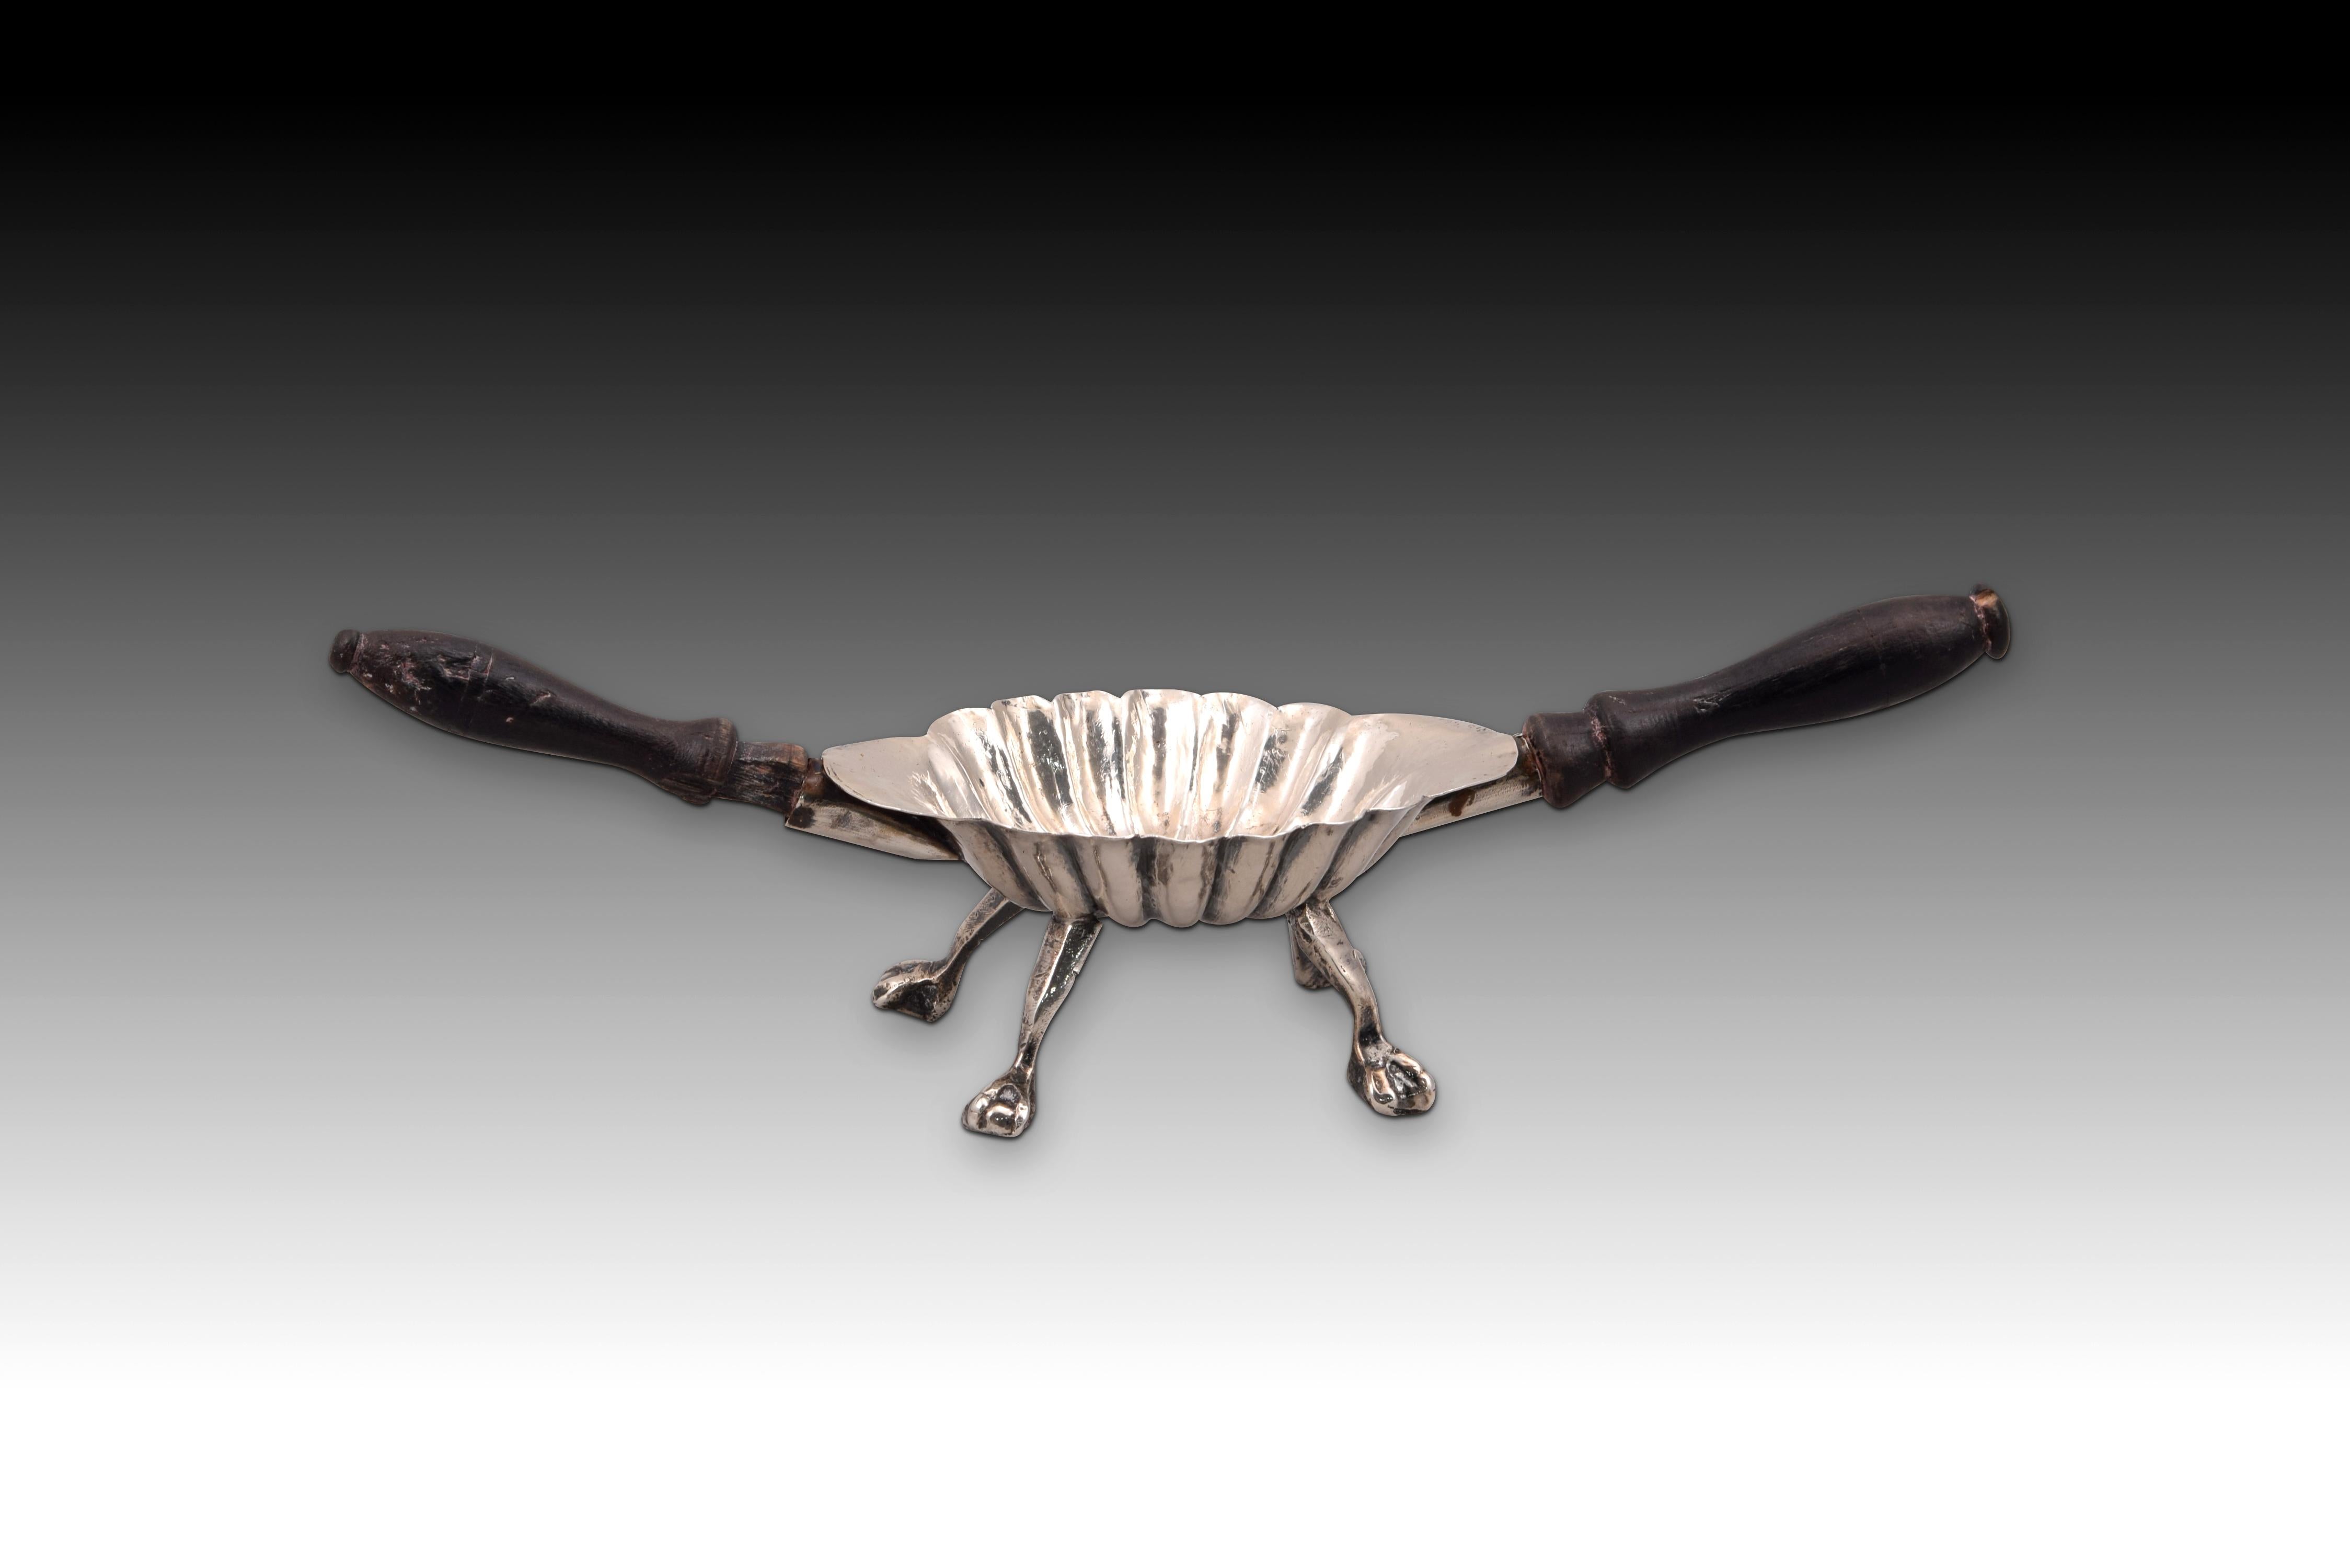 Gallon chofeta. Silver, Wood. XIX century. 
Oval chofeta with turned wood handles made in silver in its color that has a chevron or avenerado finish, as well as legs finished in a sphere with a claw. The lines and decorative elements of this piece